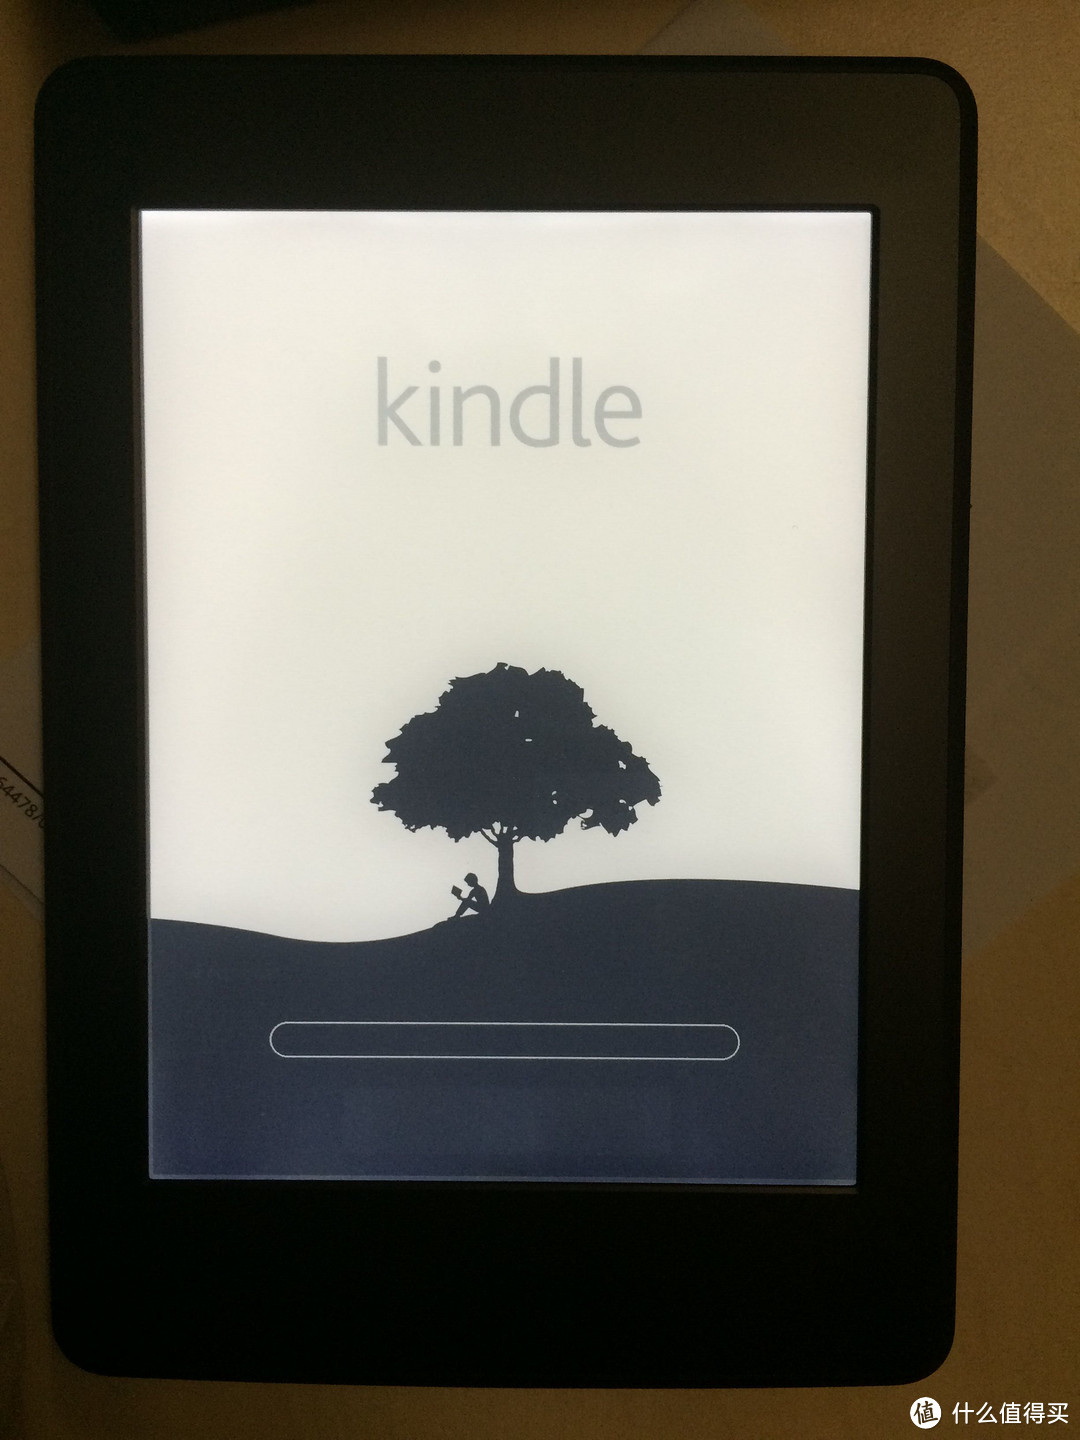 Kindle Paperwhite 3 首发开箱，简单对比kindle touch